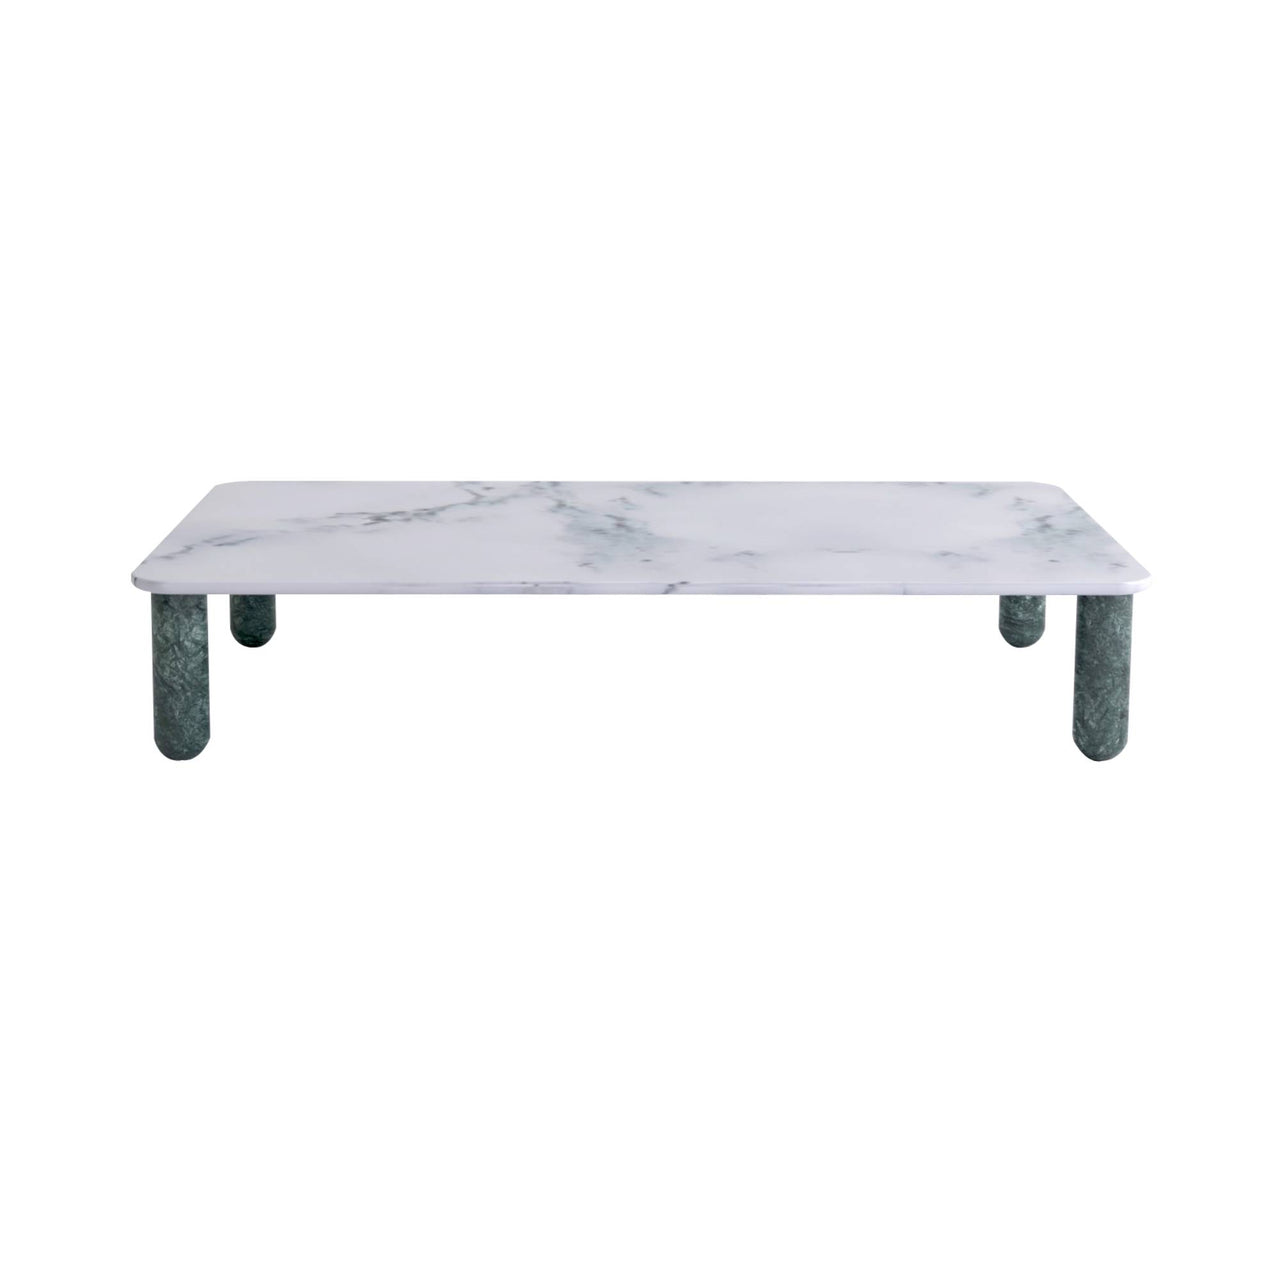 Sunday Coffee Table: White Pele de Tigre Marble + Indian Green Marble